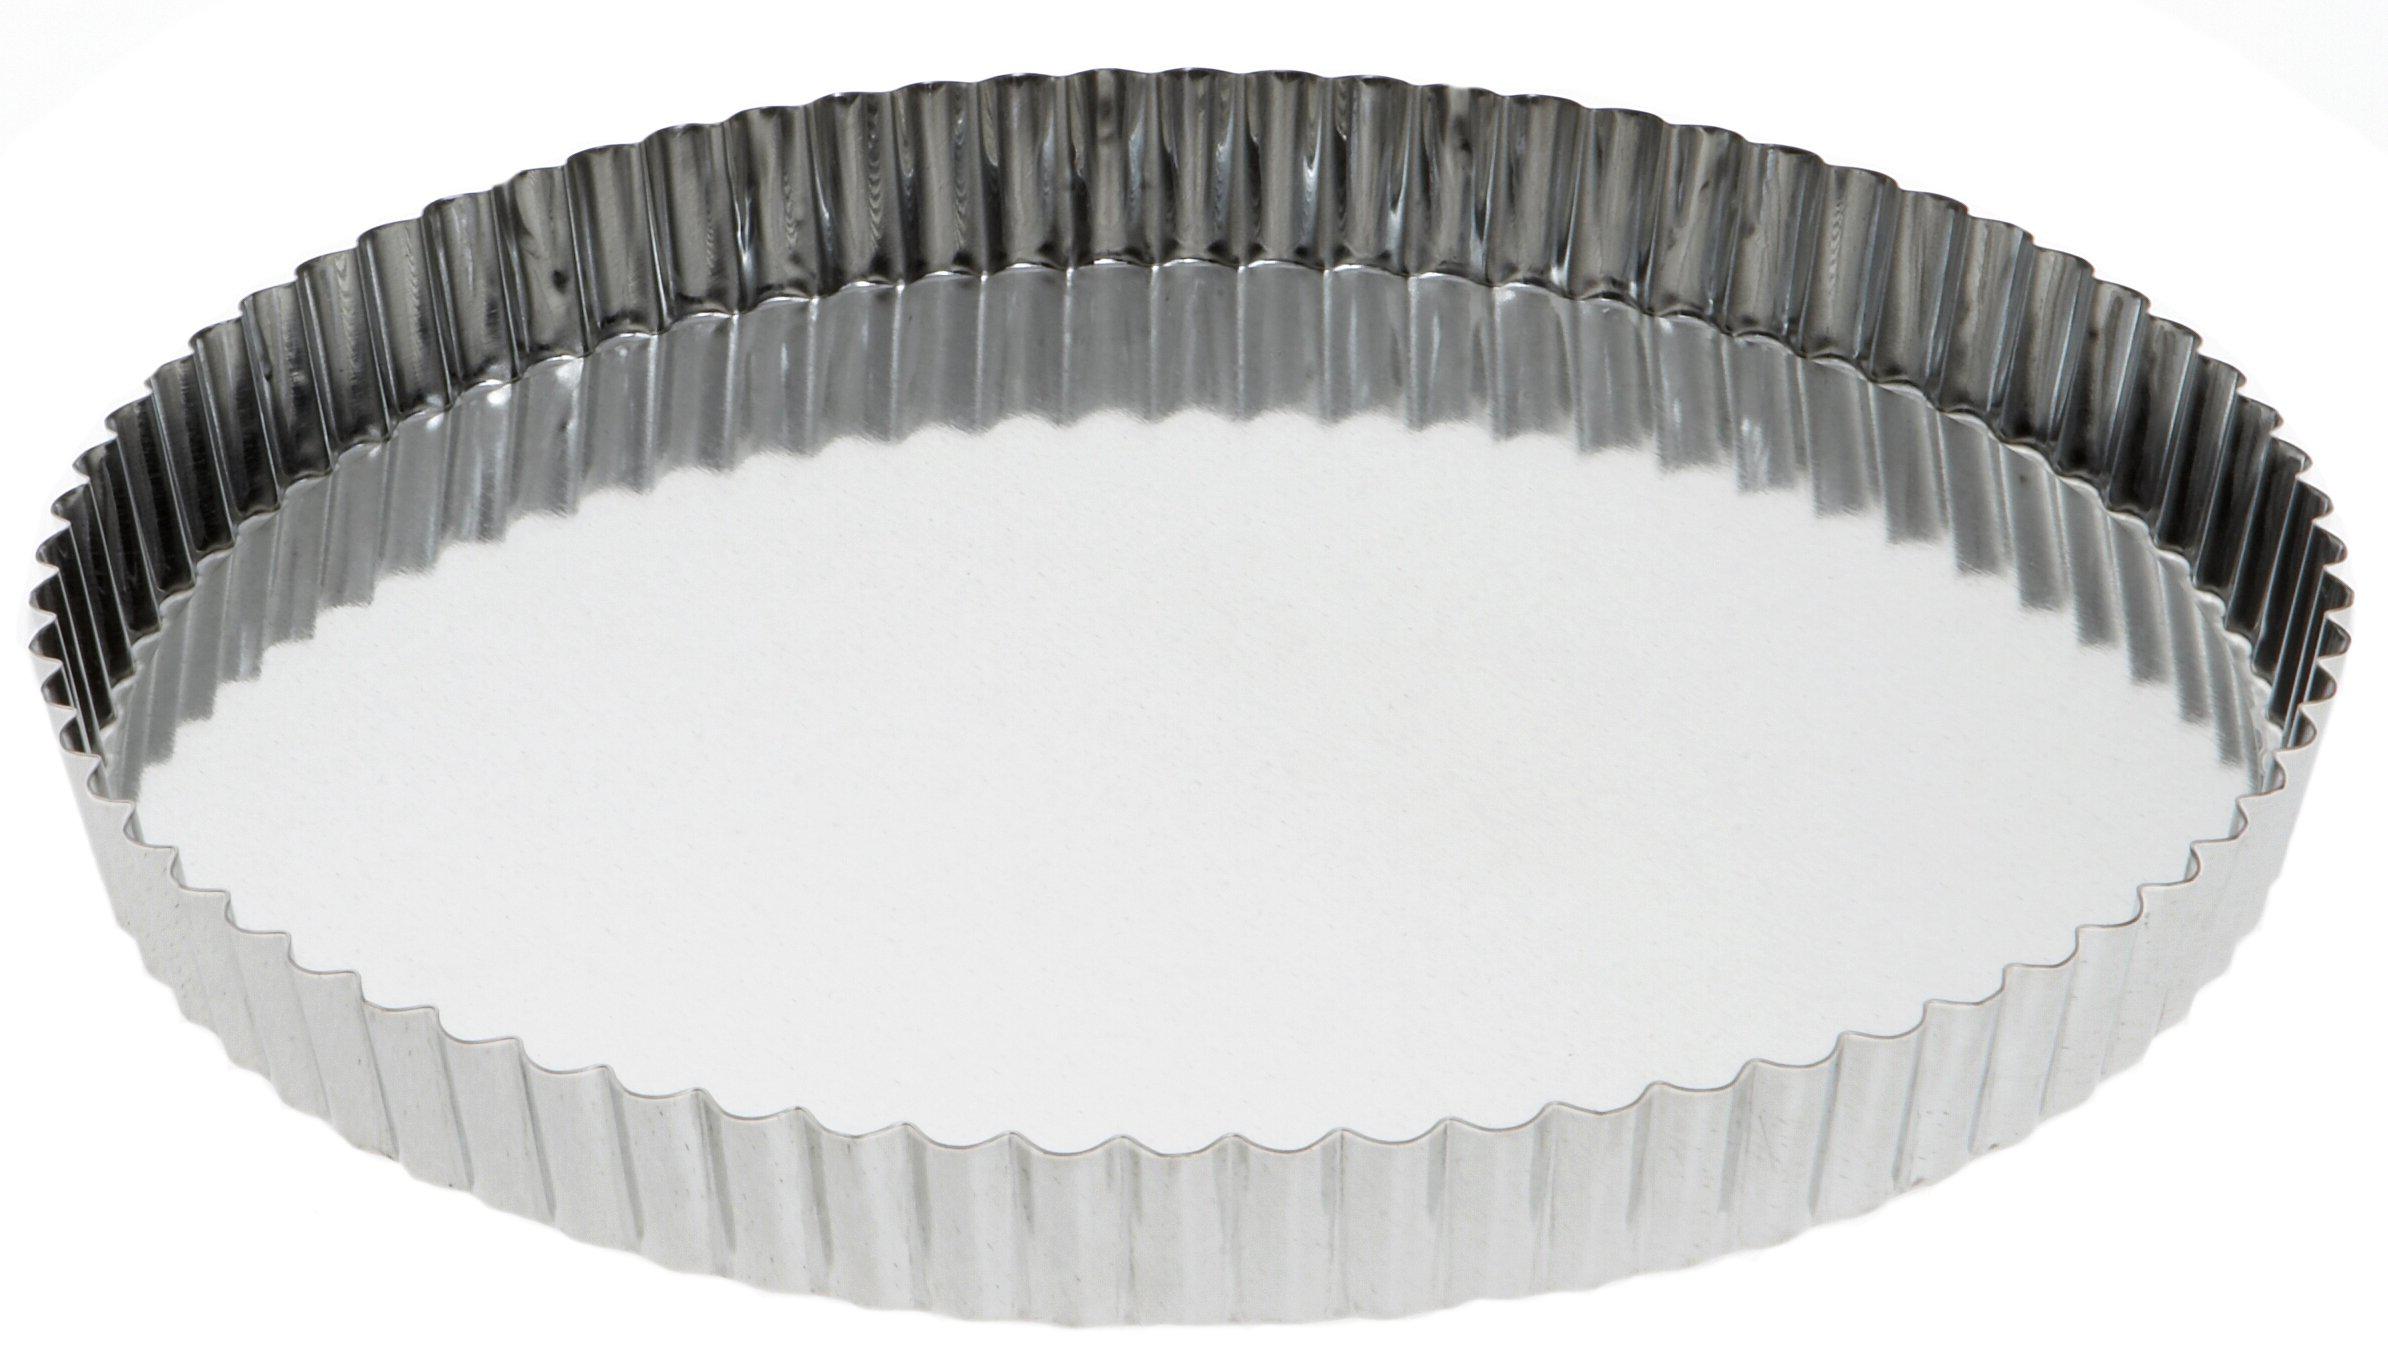 sci scandicrafts removable bottom 12.5" x 1" fluted tart/quiche mold, silver